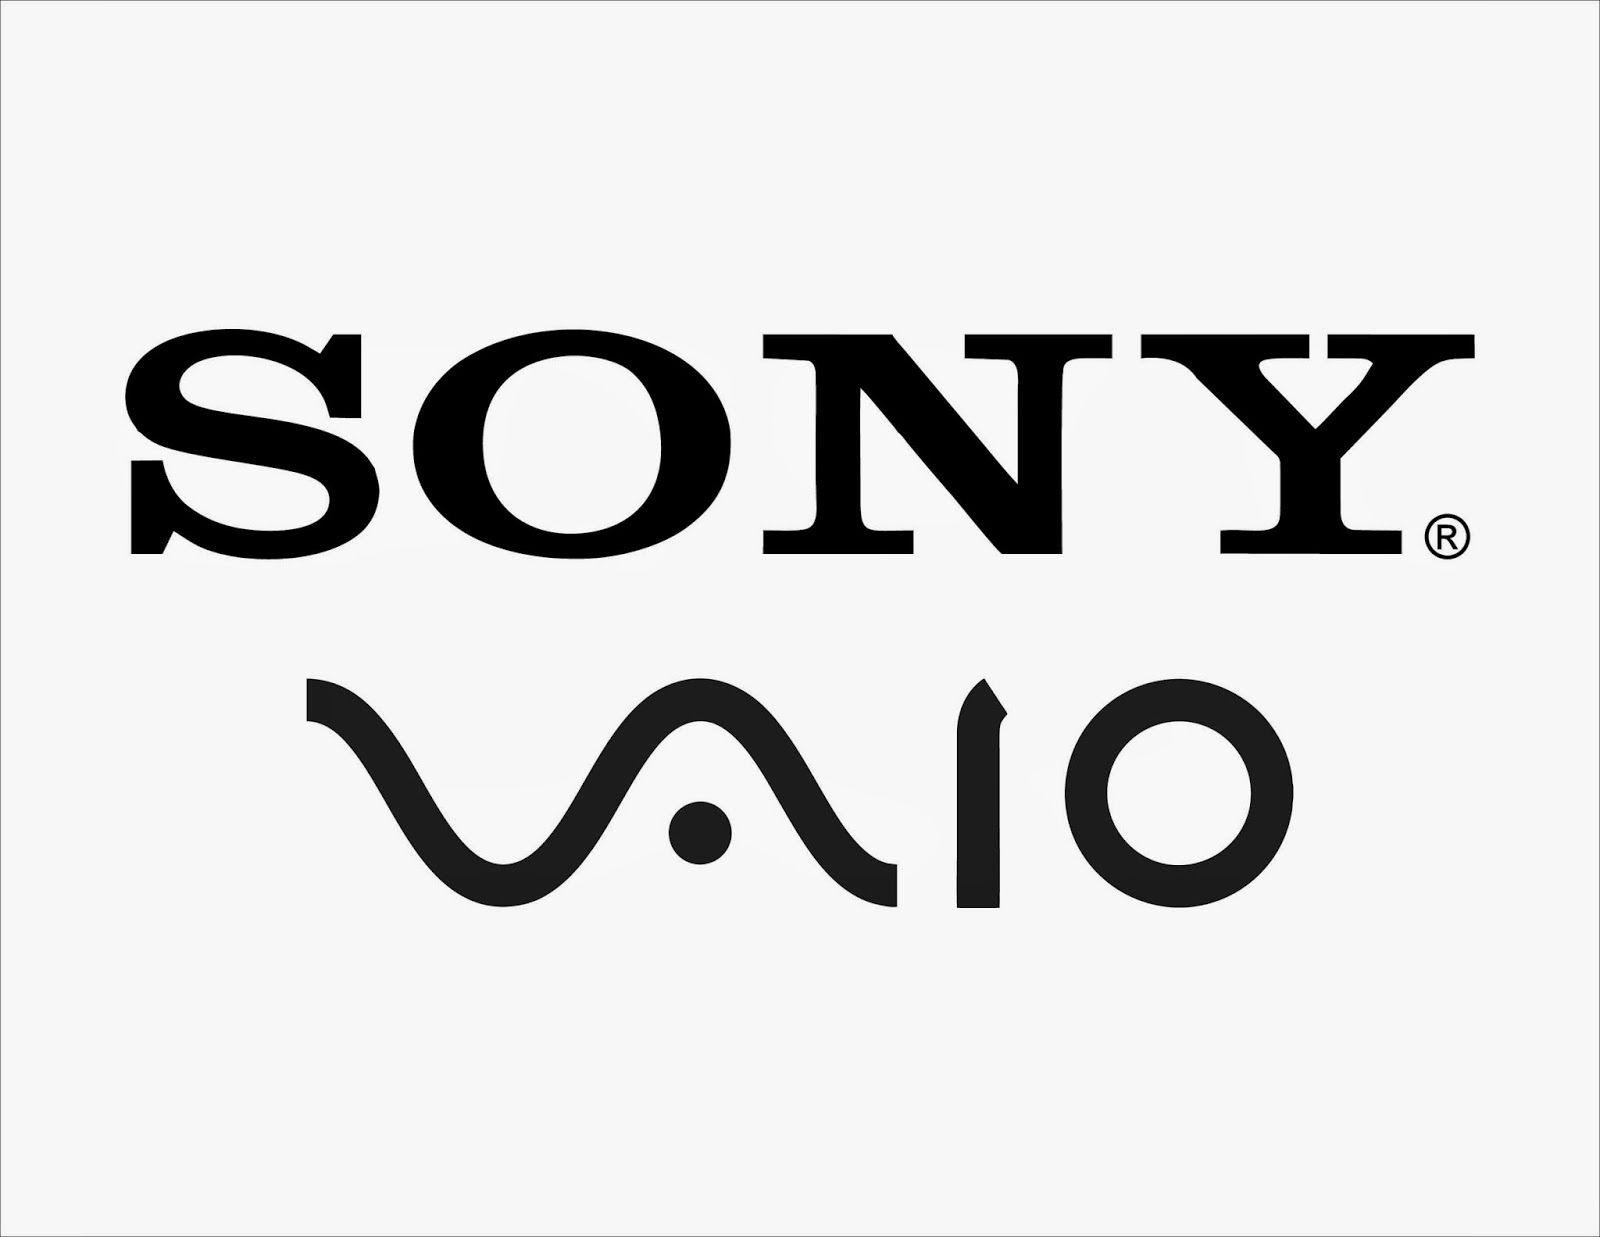 Vaio Logo - Another clever design that not many people would initially get. The ...